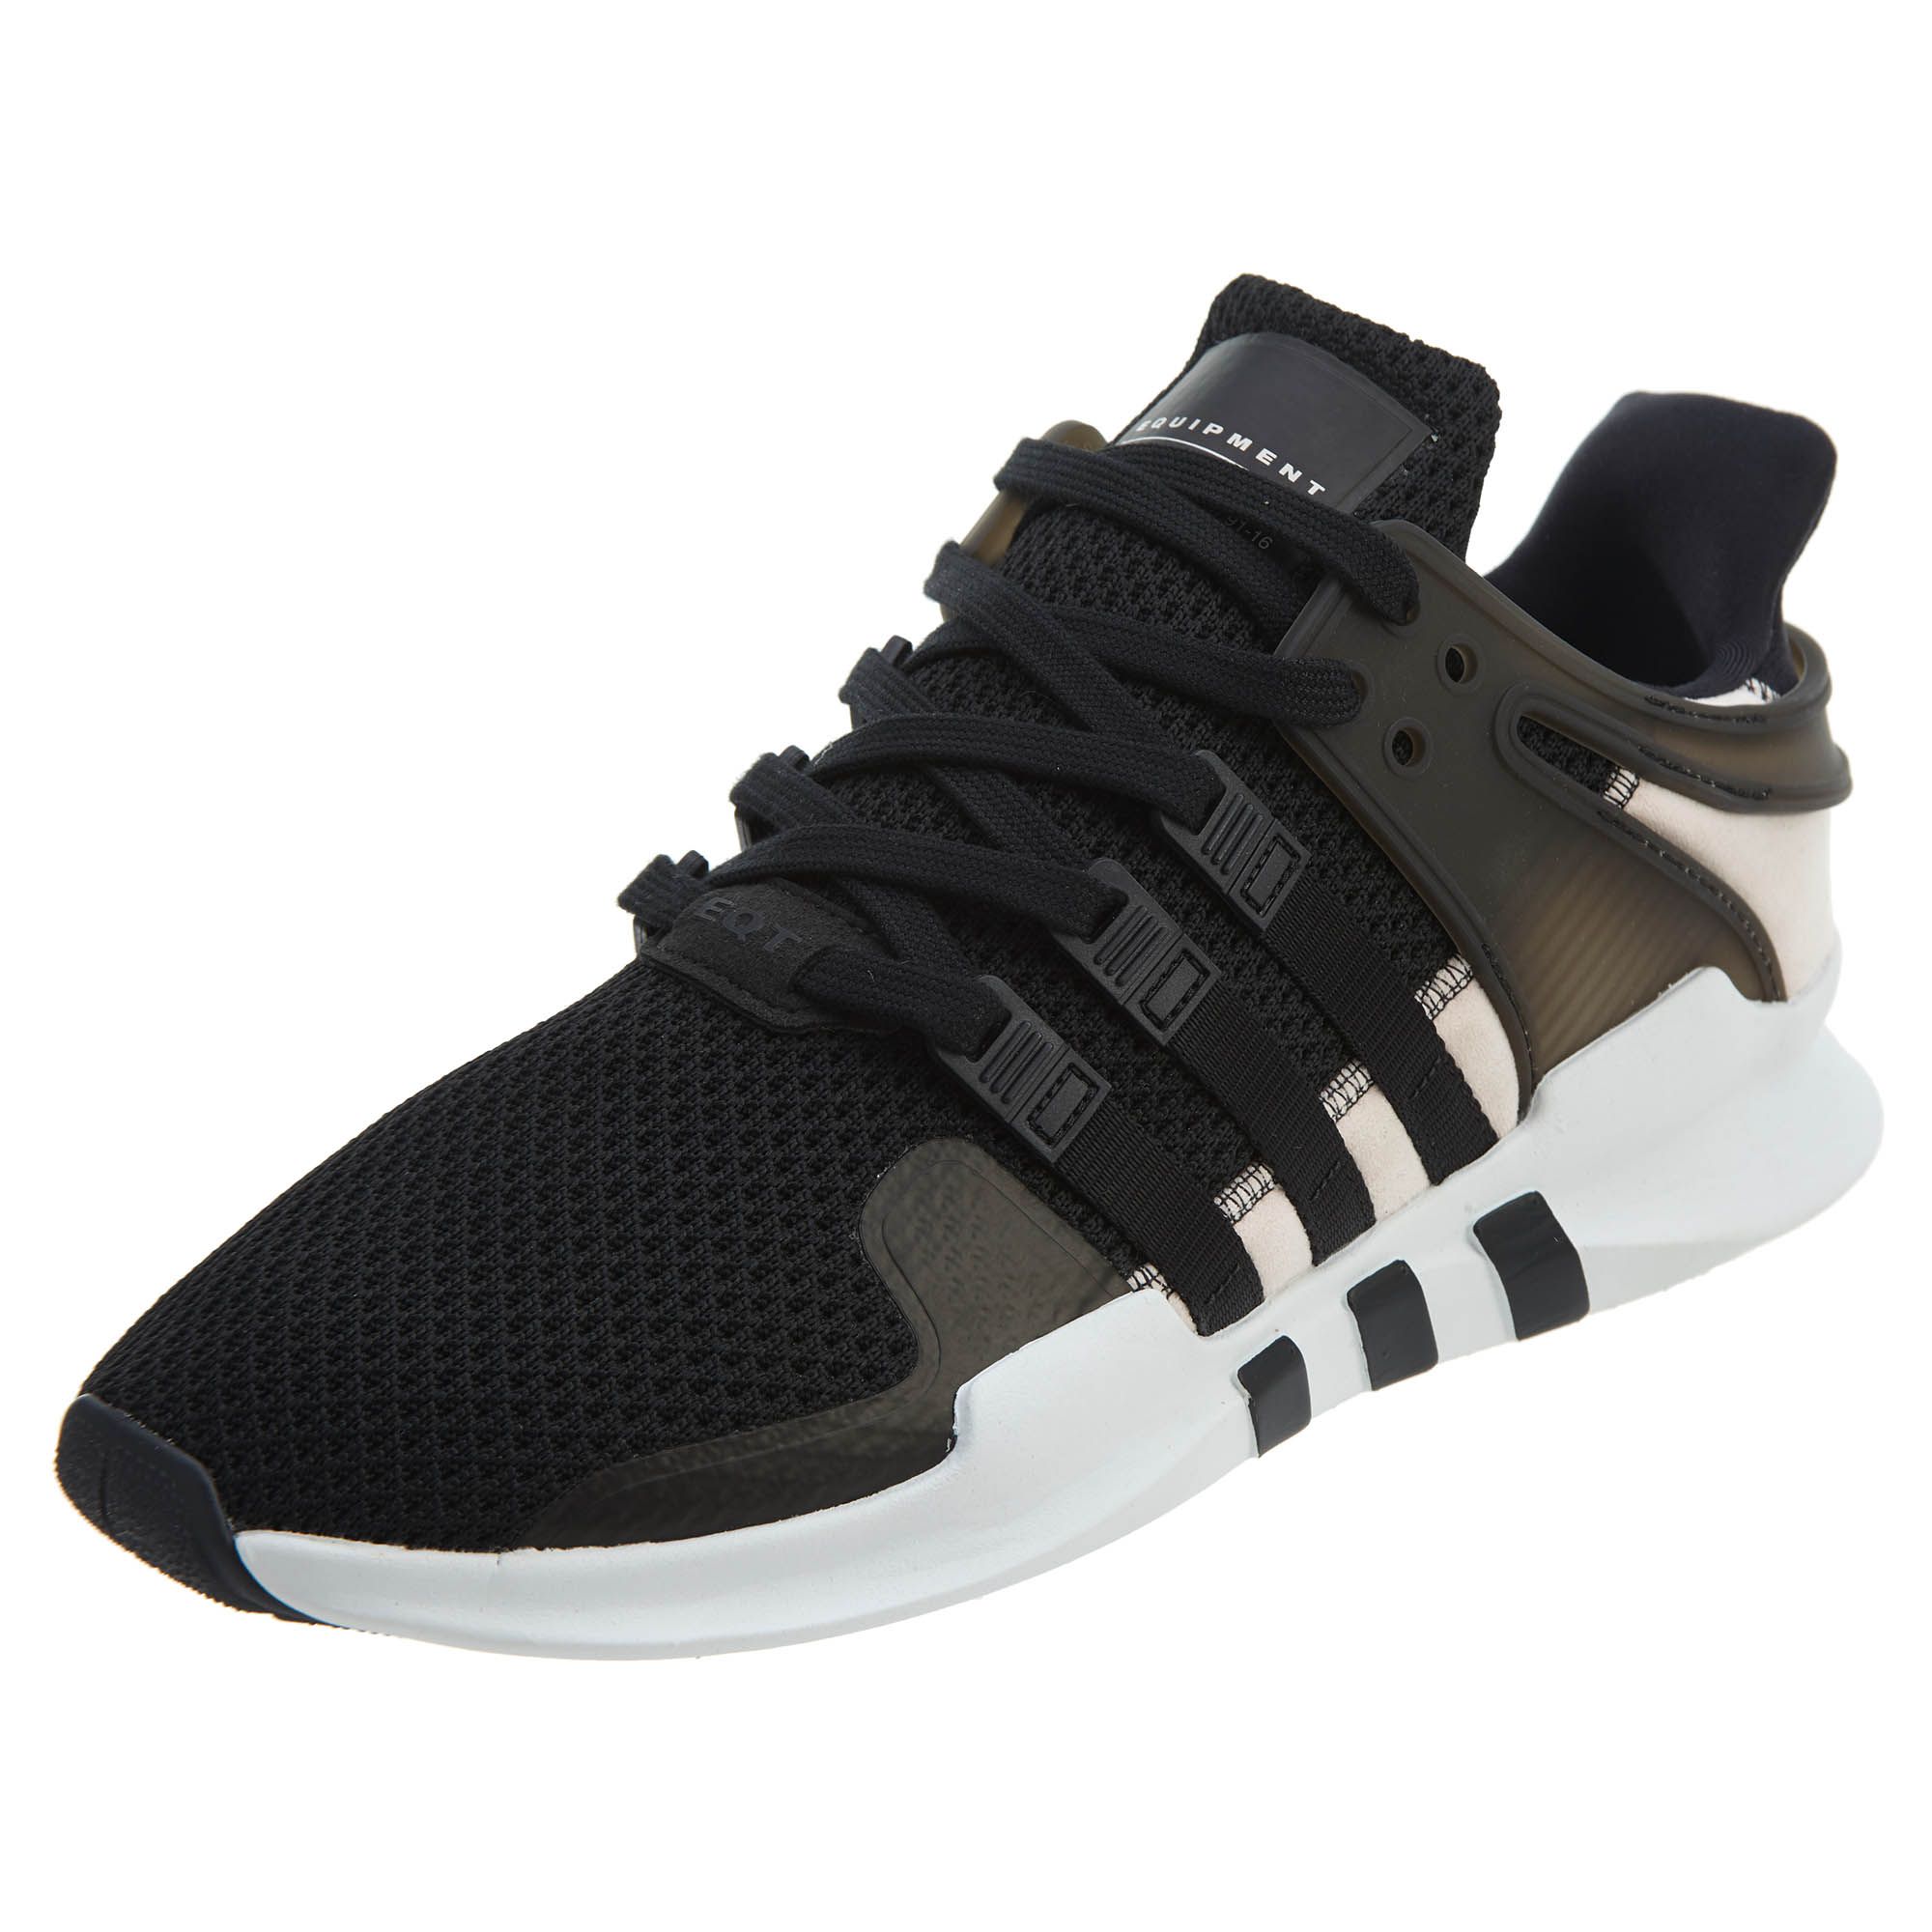 Adidas Eqt Support Adv Womens Style 